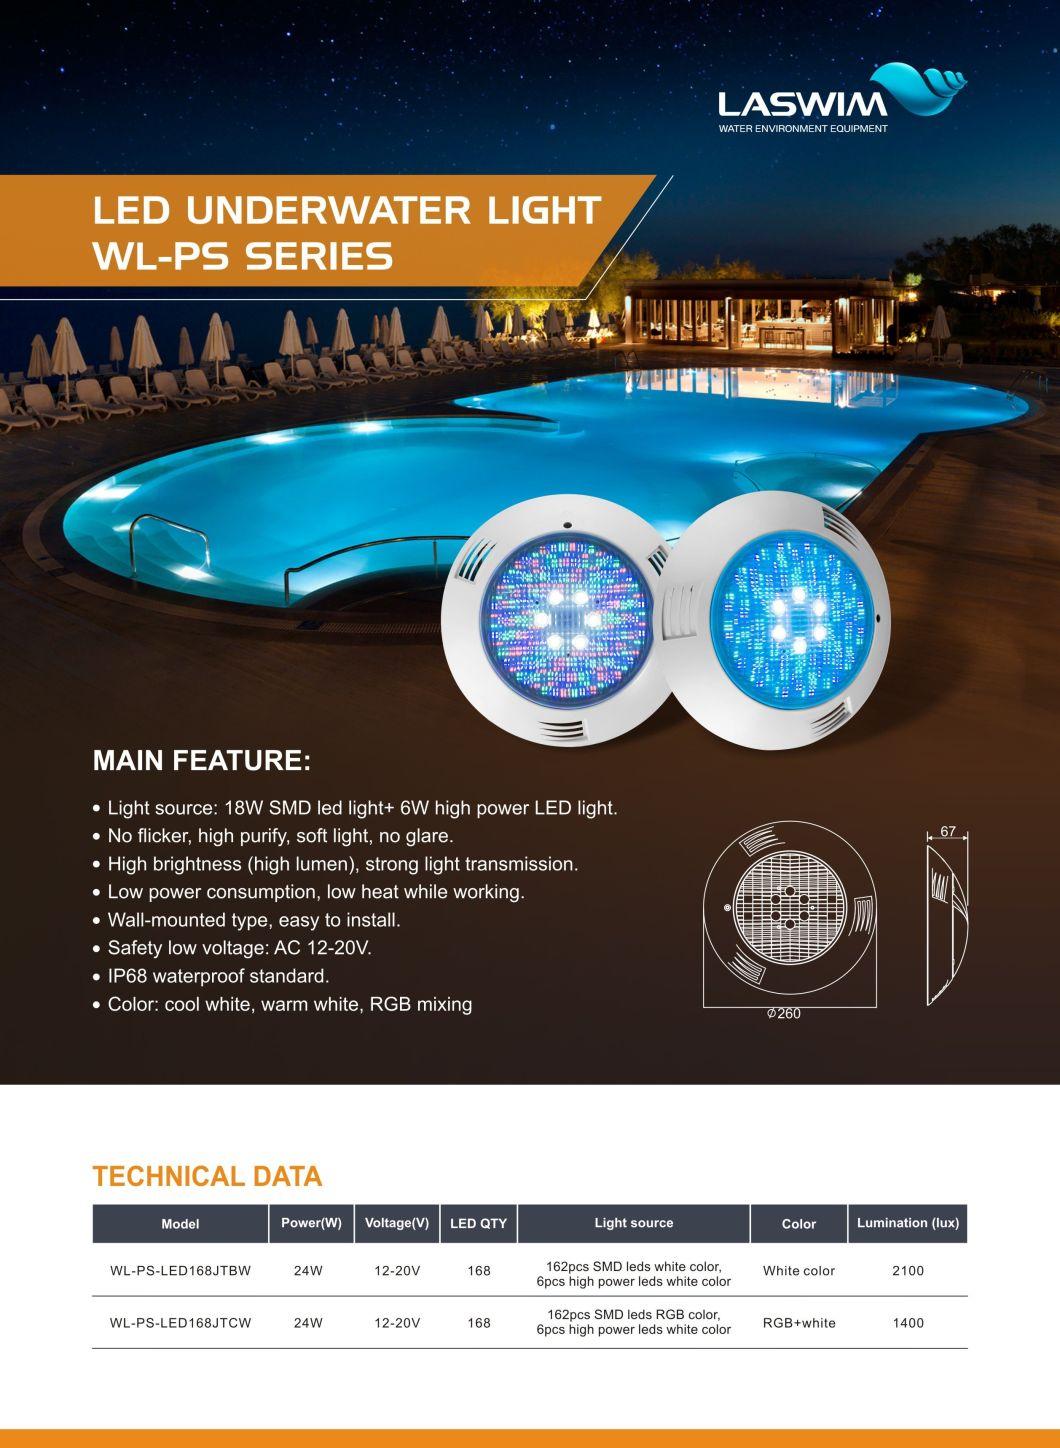 Good Service Hot Selling Carton Packed LED Pool Light